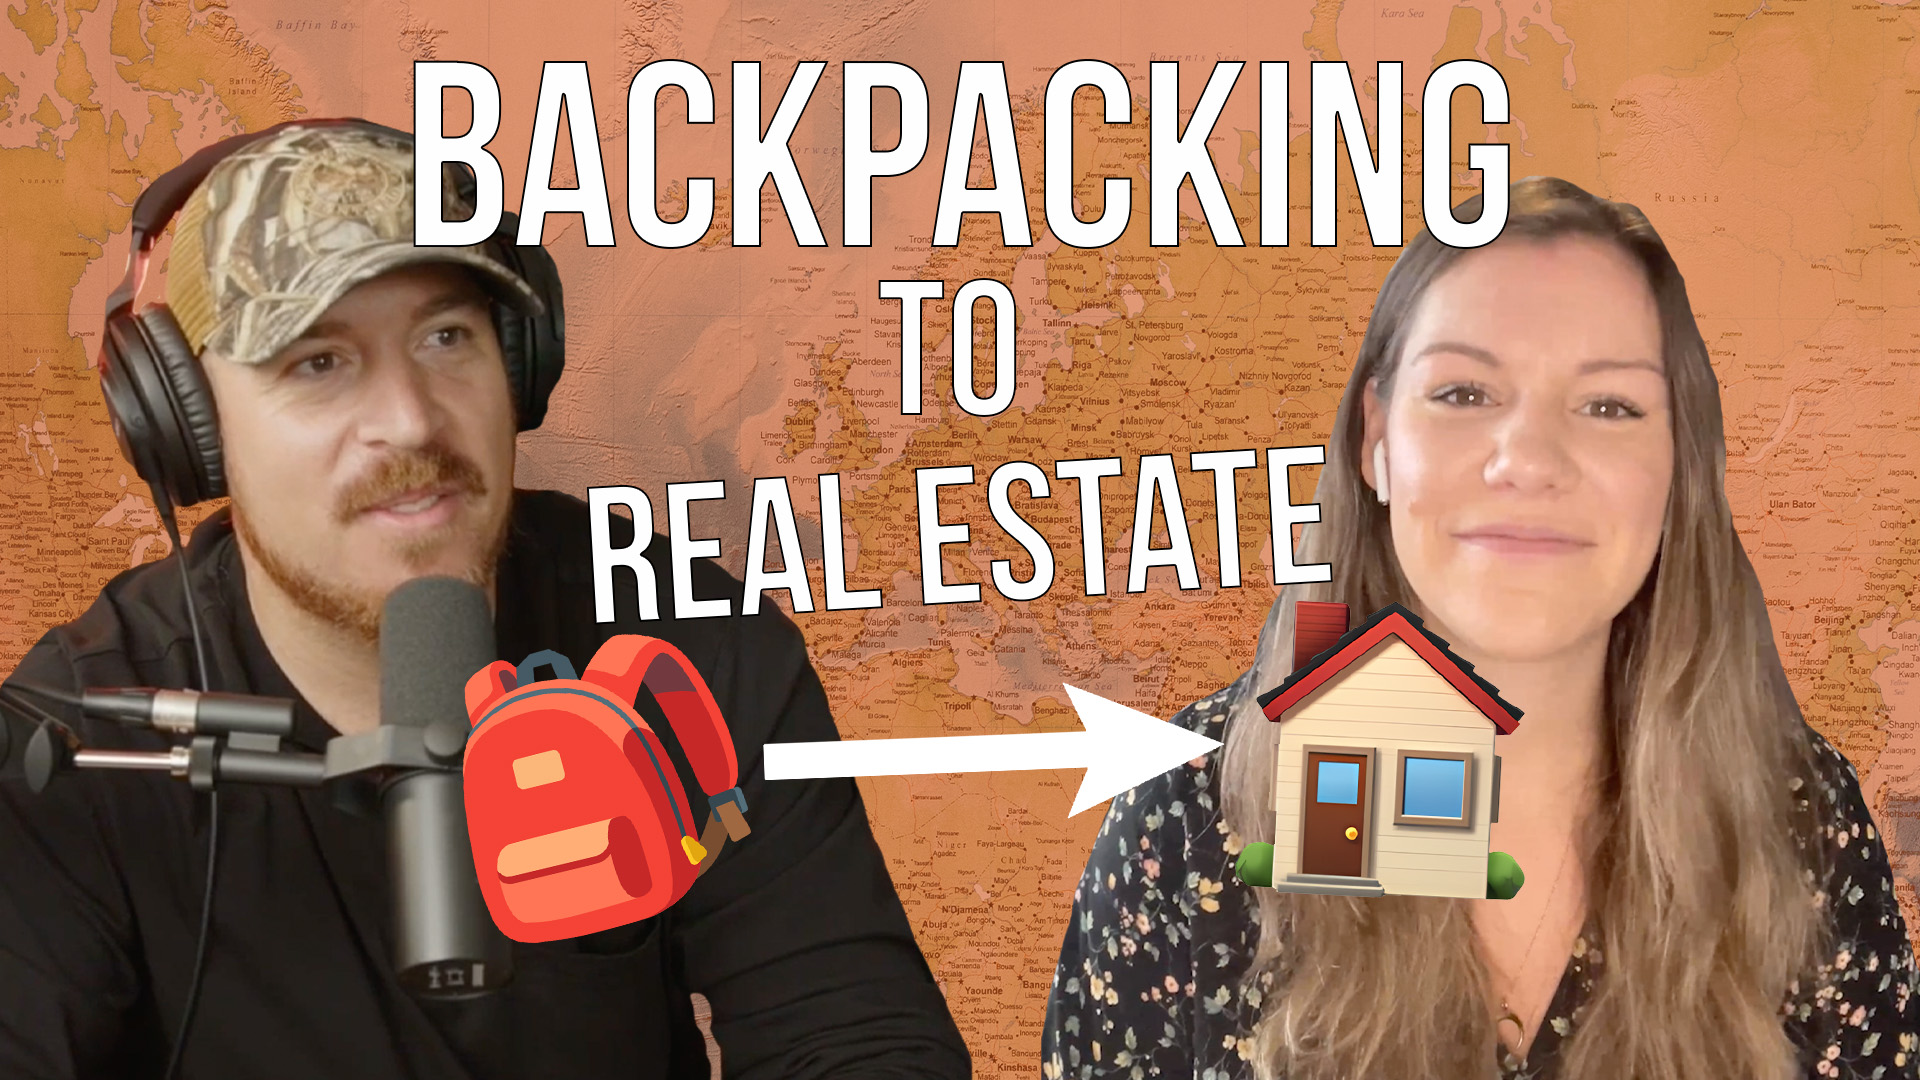 https://financecowboy.com/podcast/from-backpacking-around-the-world-to-real-estate-success-w-danielle-crawford/